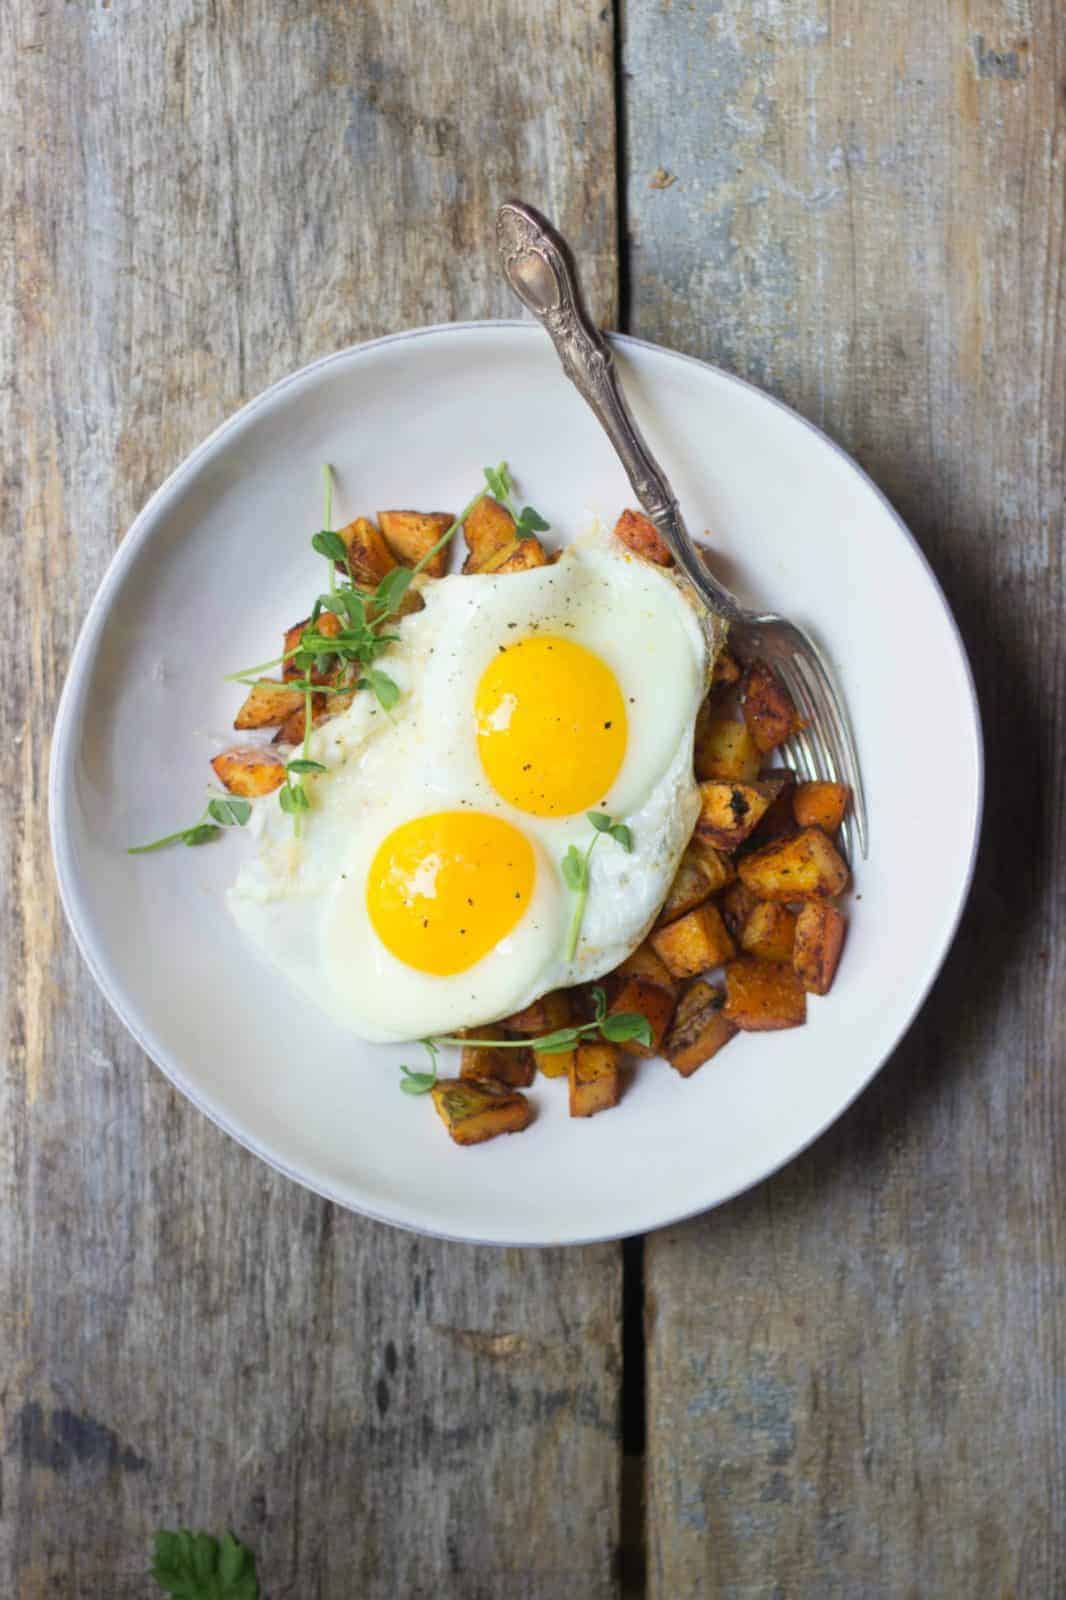 Crispy breakfast potatoes with fried eggs in a white bowl